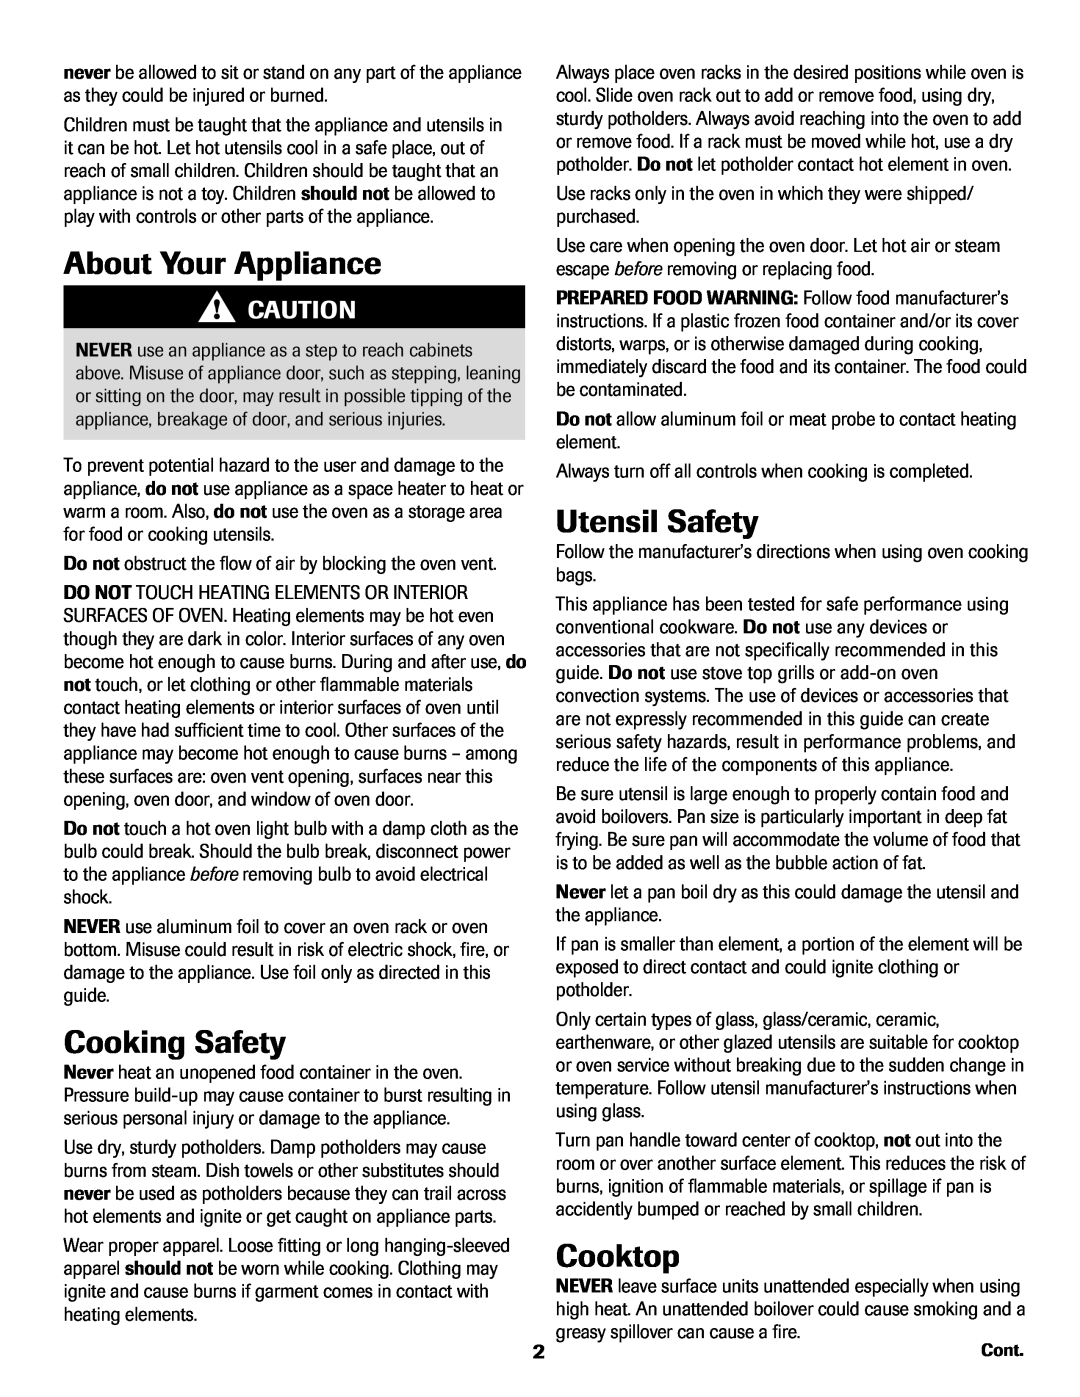 Amana AER5722CAS manual About Your Appliance, Cooking Safety, Utensil Safety, Cooktop 